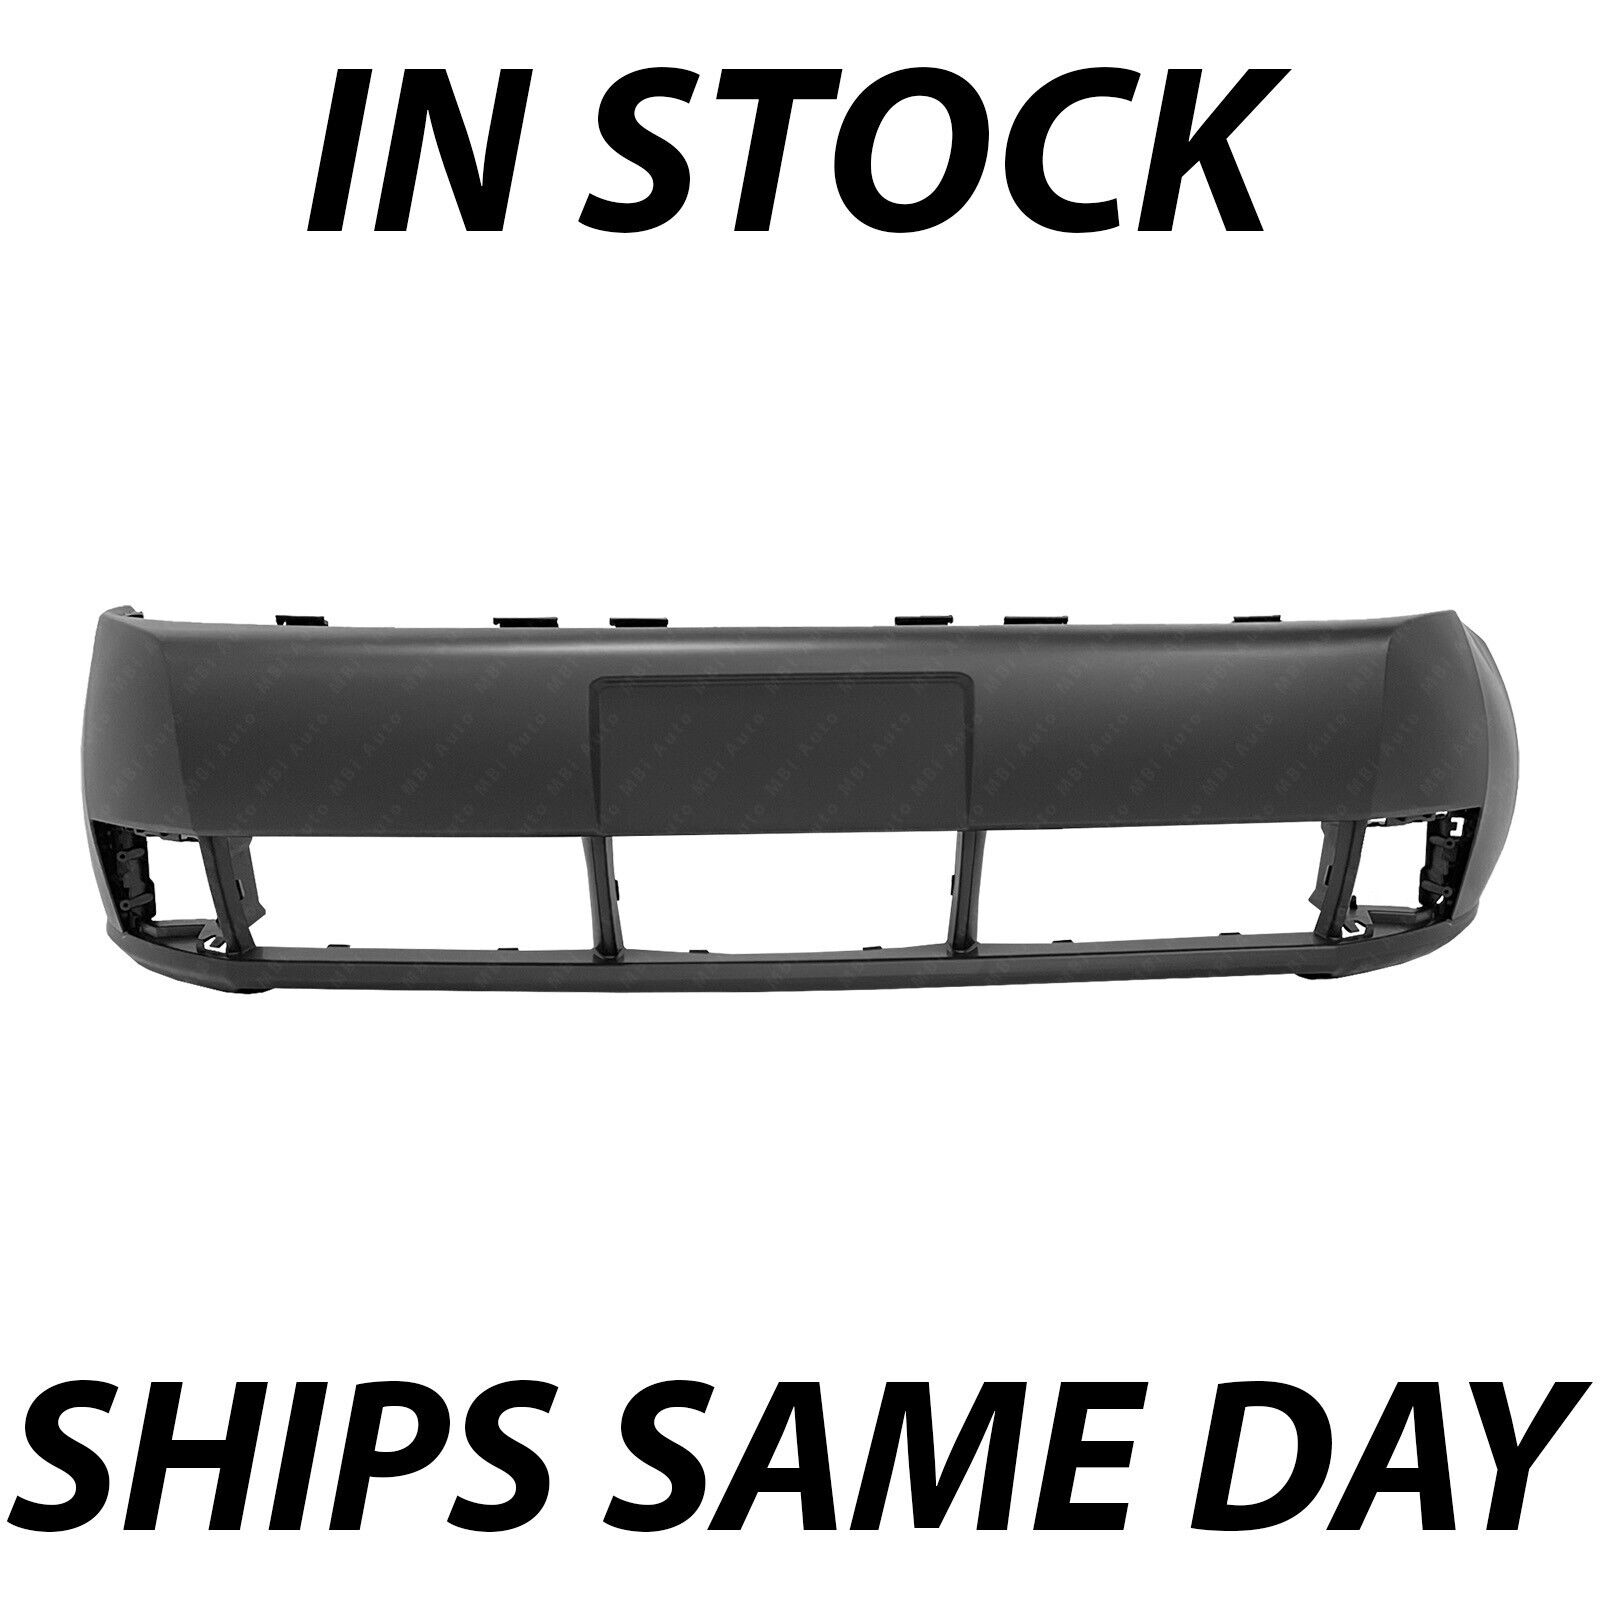 NEW Primered - Front Bumper Cover Replacement for 2008 2009 2010 2011 Ford Focus